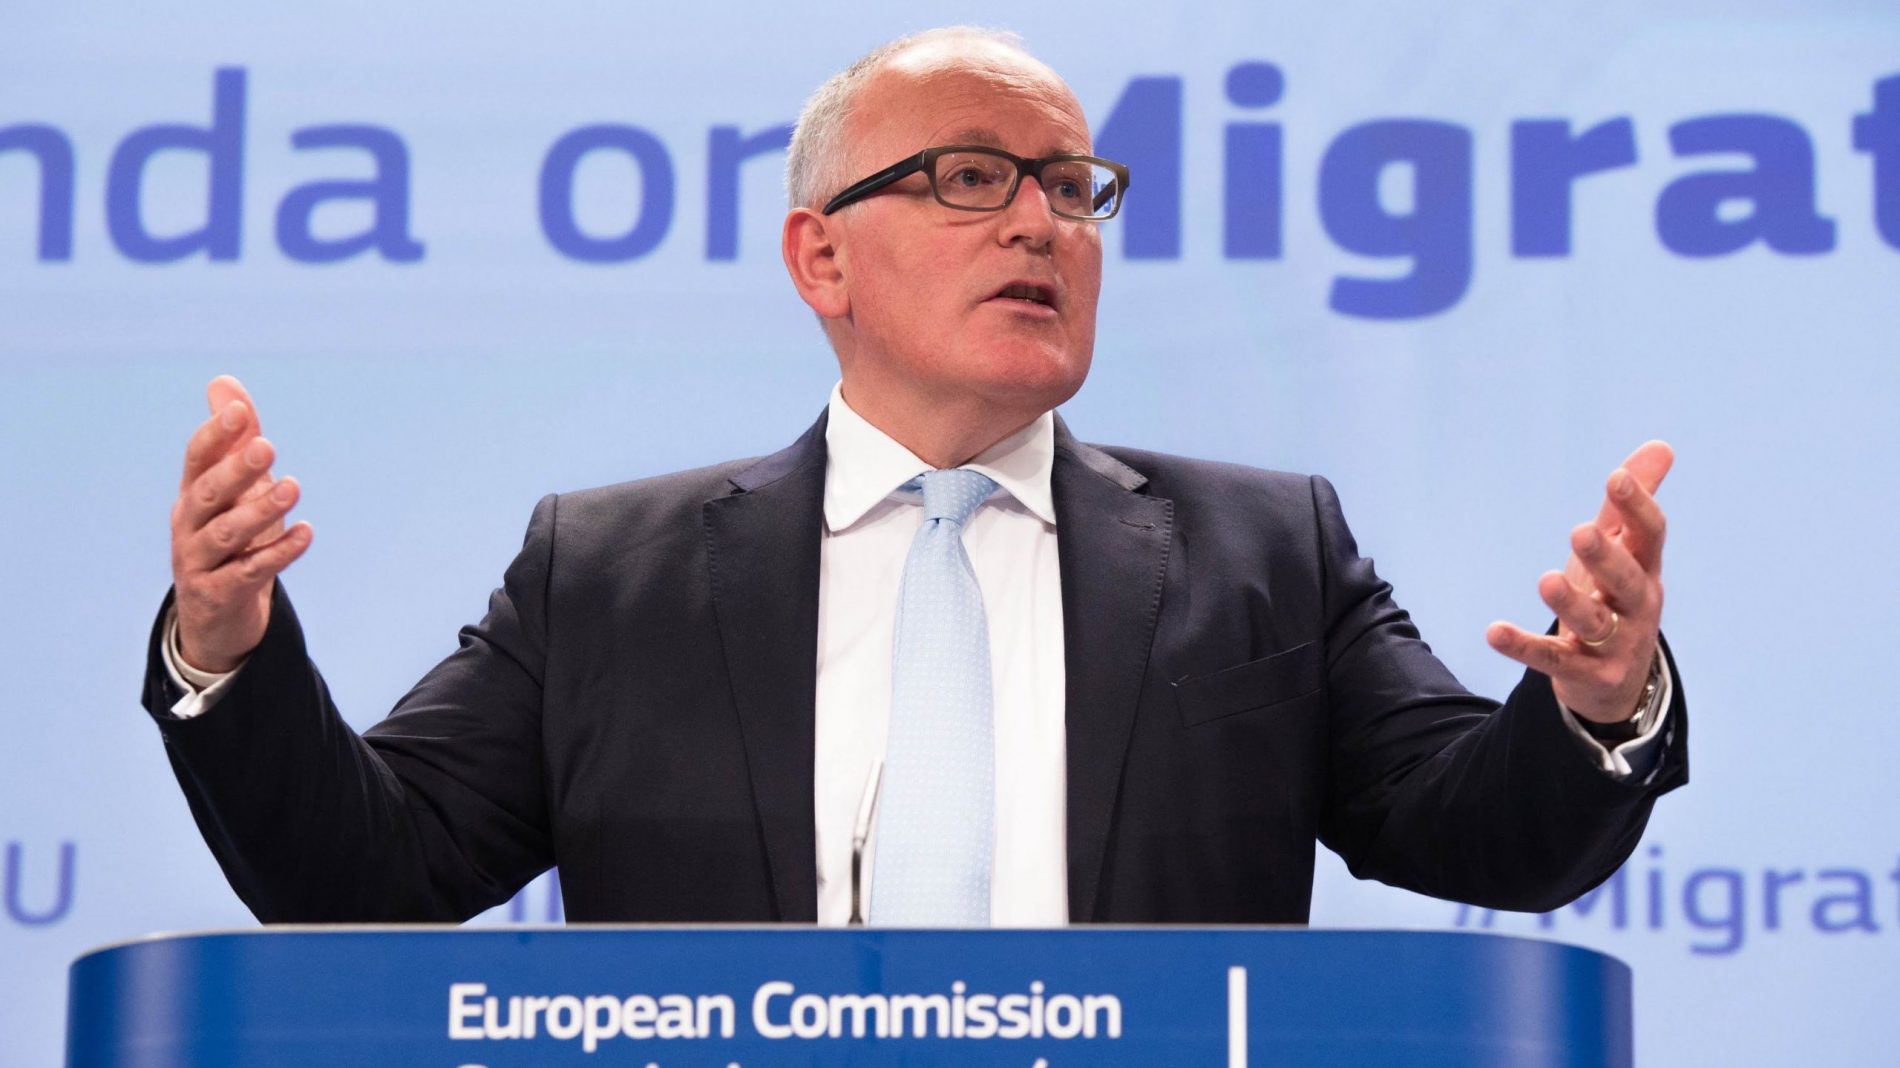 First vice president of the European Commission